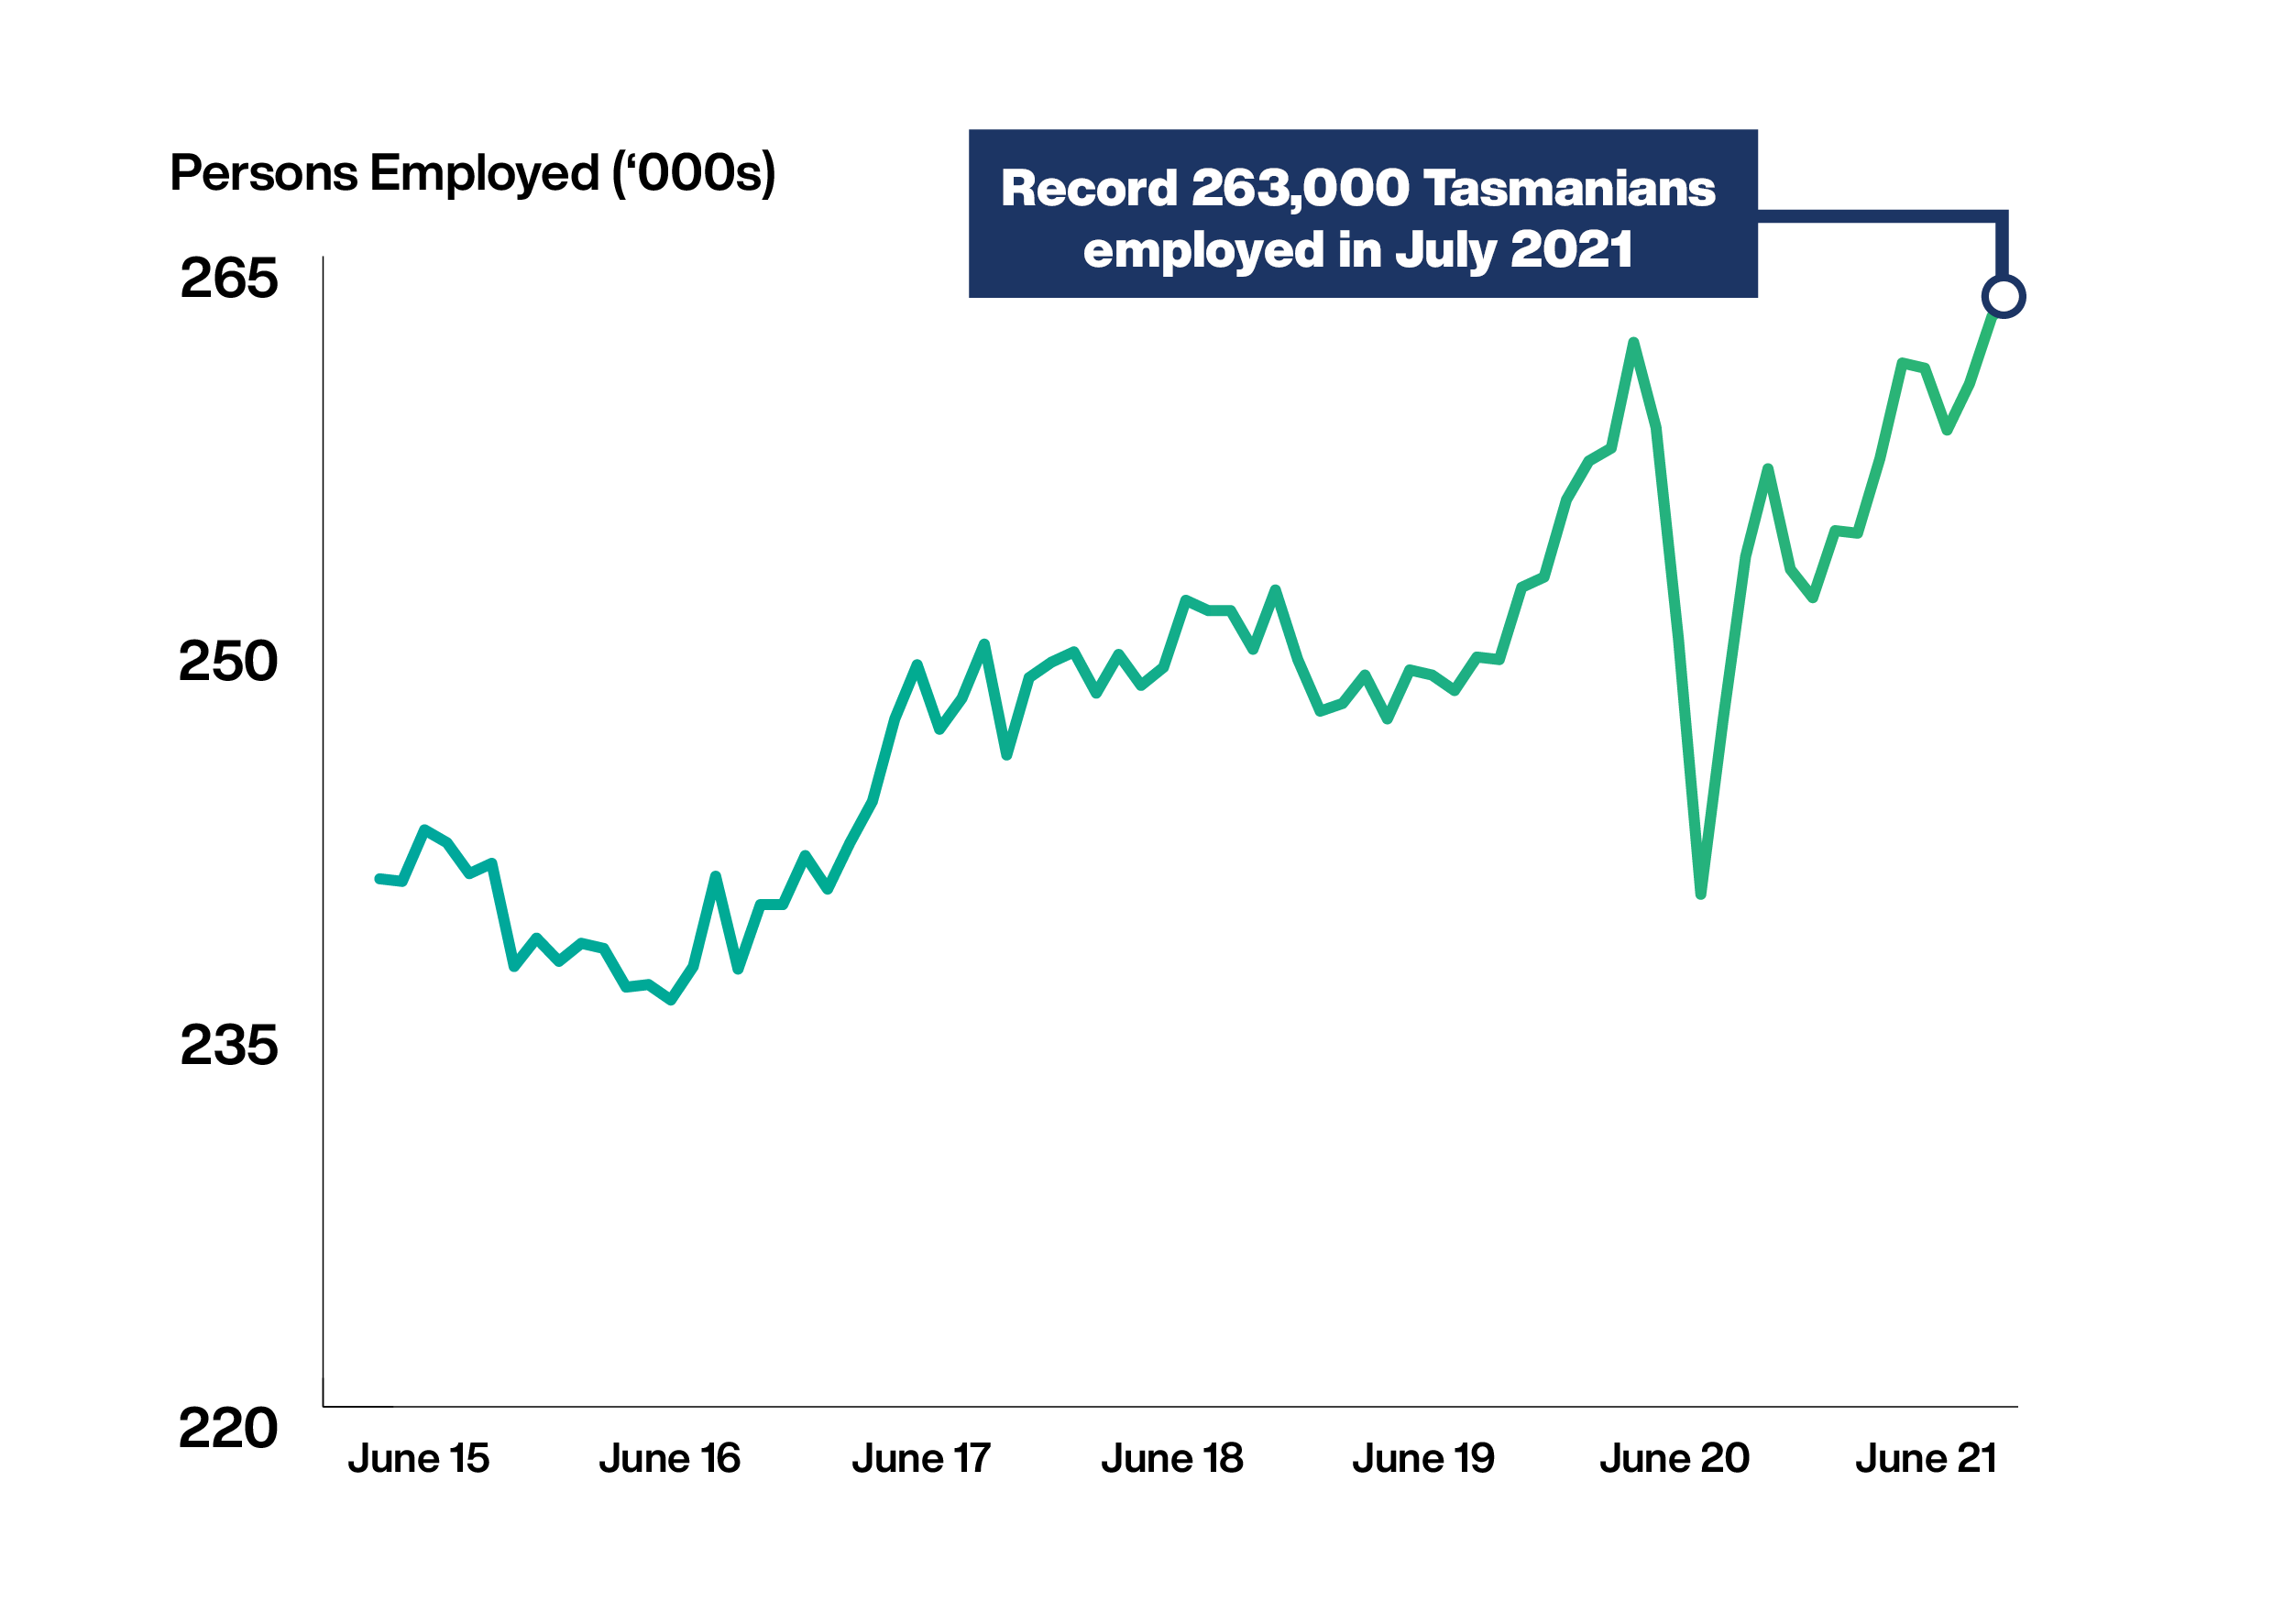 Record 263,000 Tasmanians employed in July 2021